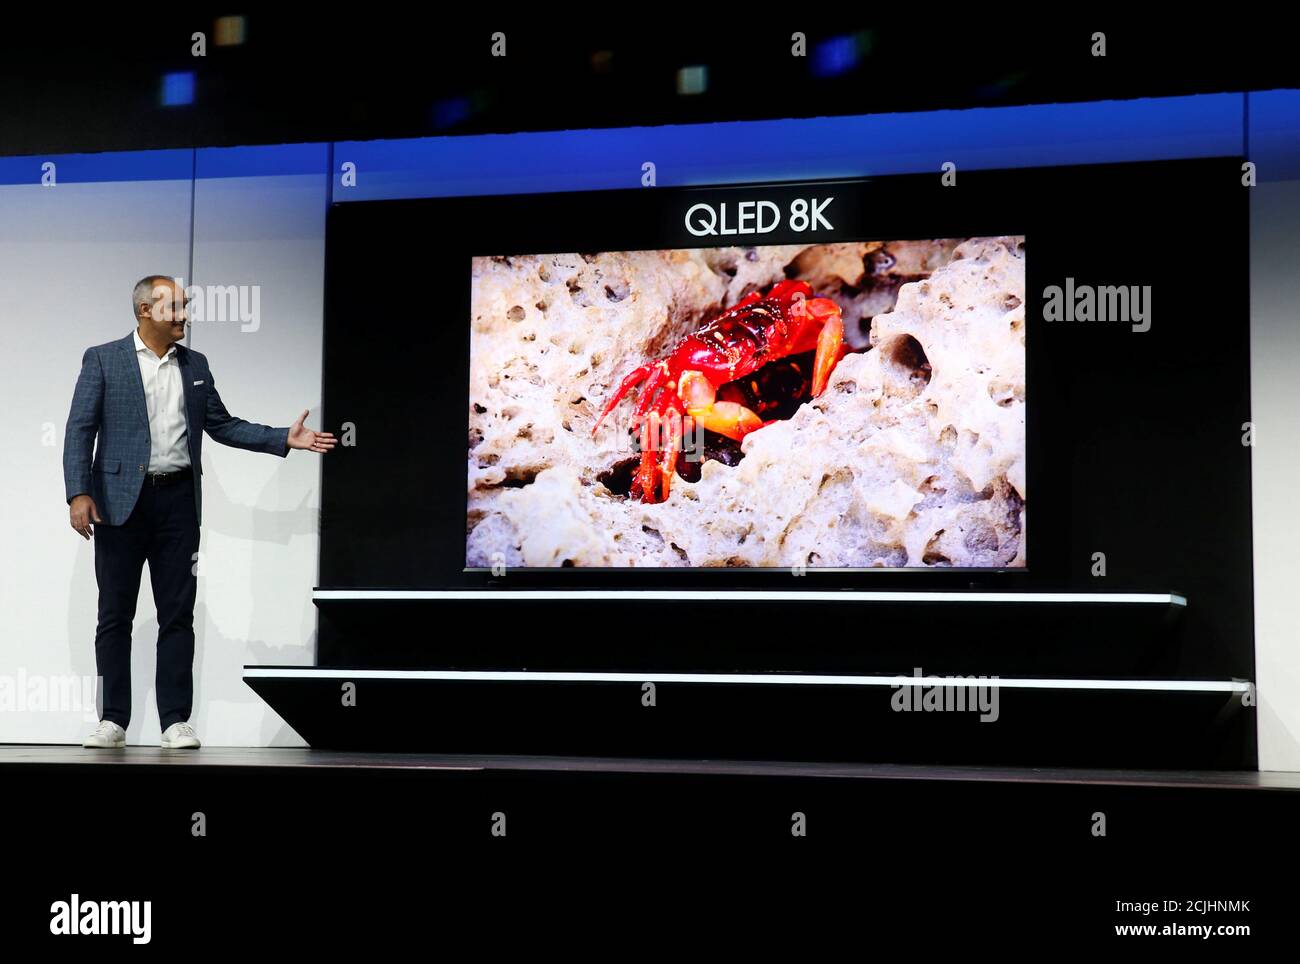 Dave Das, senior vice president of consumer electronics product marketing at Samsung Electronics America, shows off a 98-inch, QLED 8K smart television during a Samsung news conference at the 2019 CES in Las Vegas, Nevada, U.S. January 7, 2019. REUTERS/Steve Marcus Stock Photo